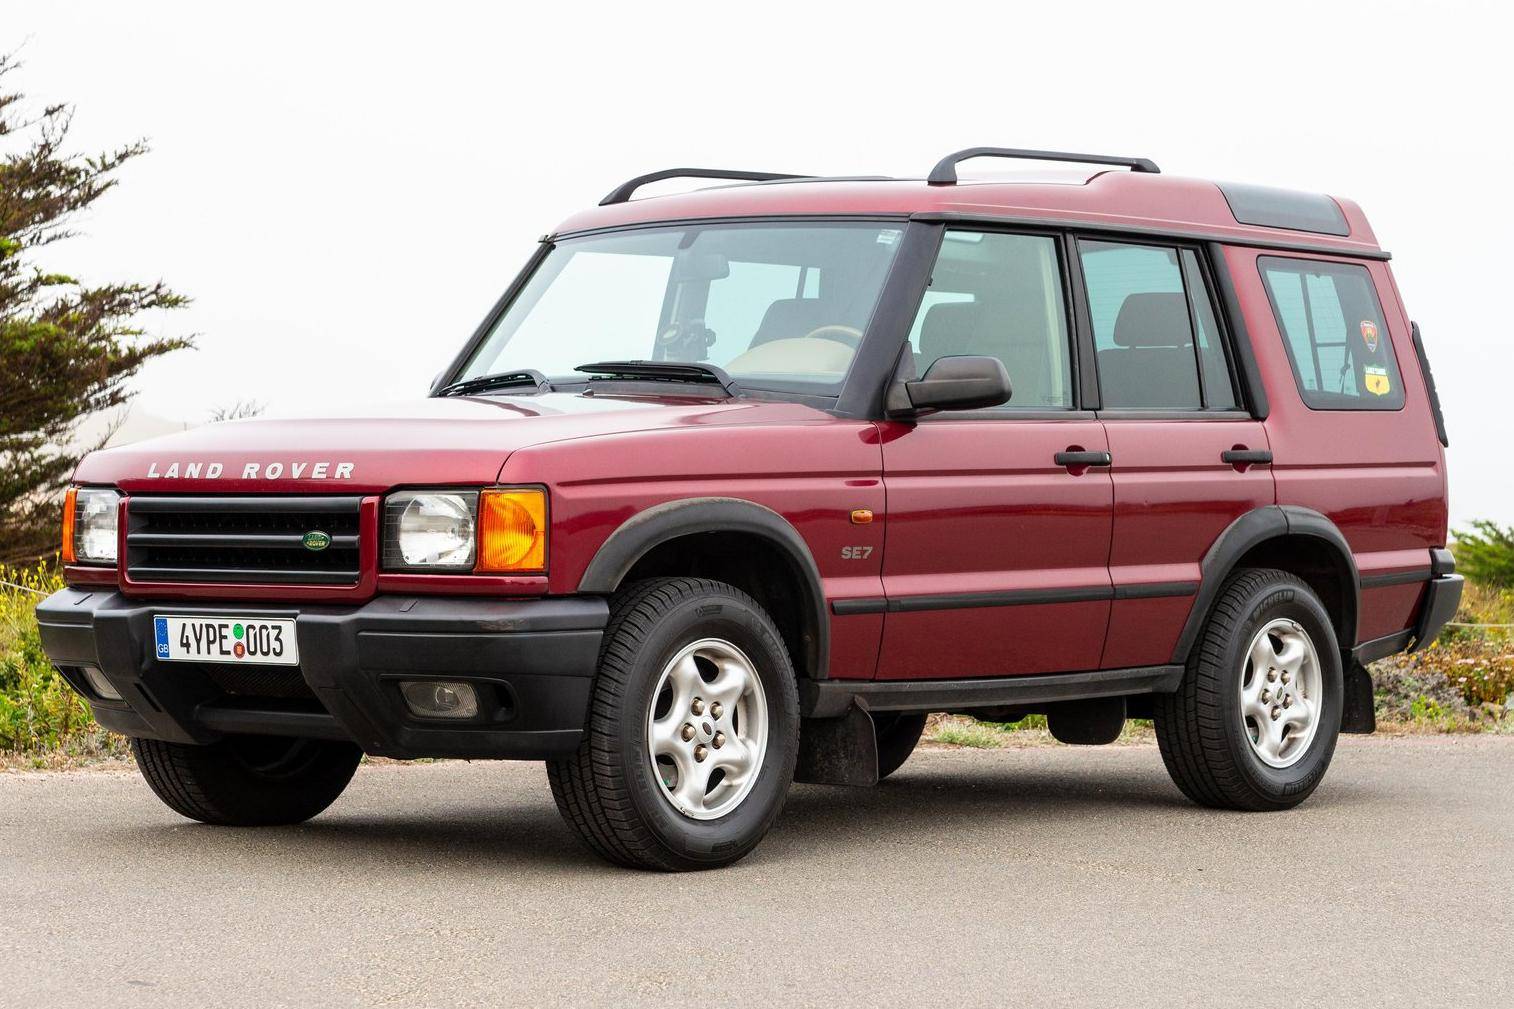 2001 Land Rover Discovery II SE7 for Sale - Cars & Bids